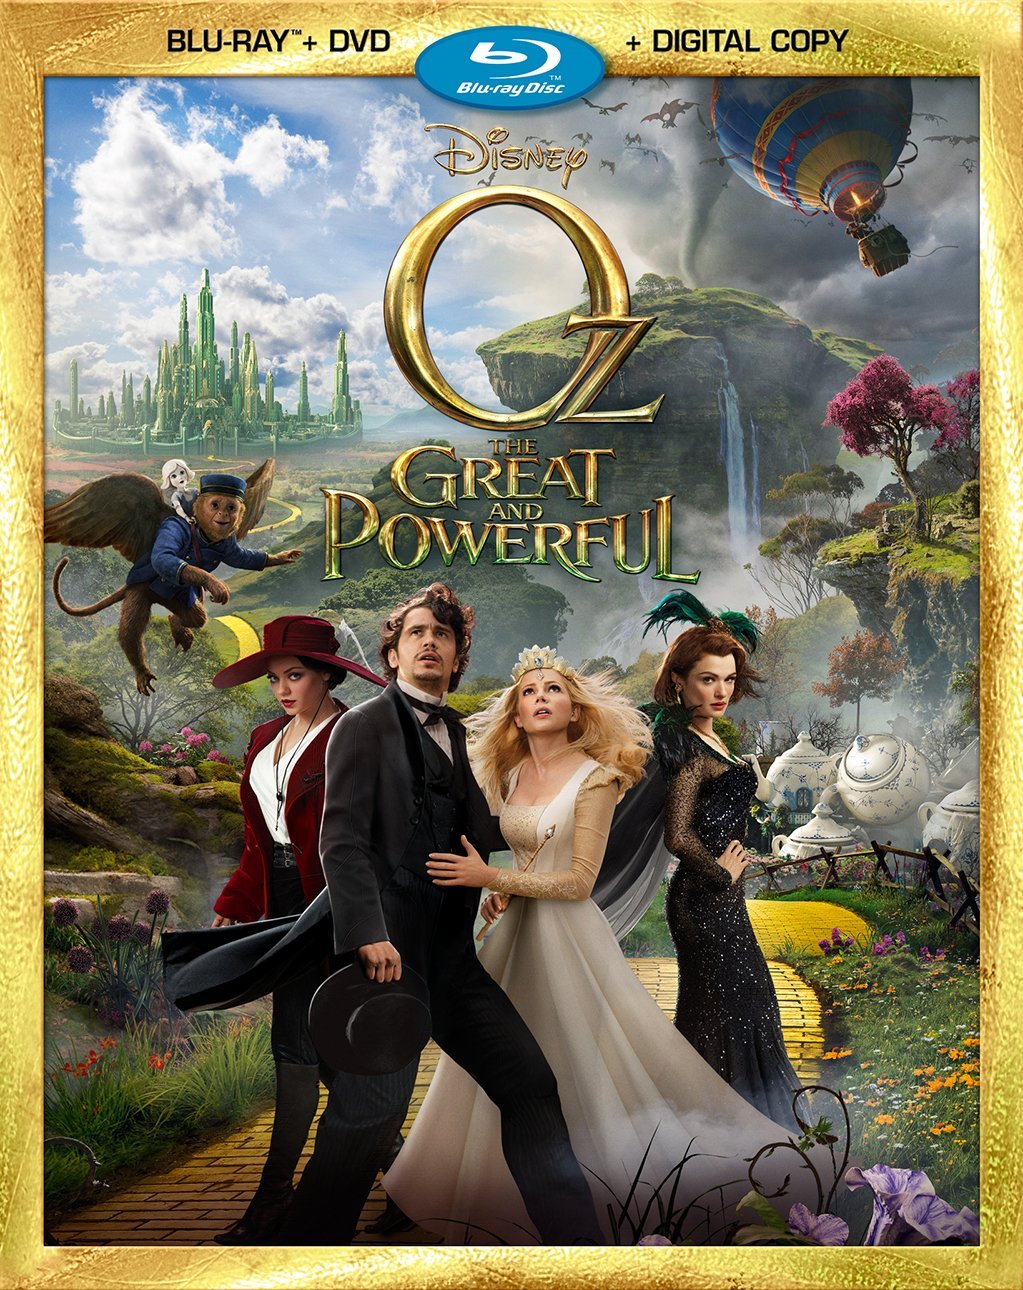 DVD Reviews: Oz the Great and Powerful